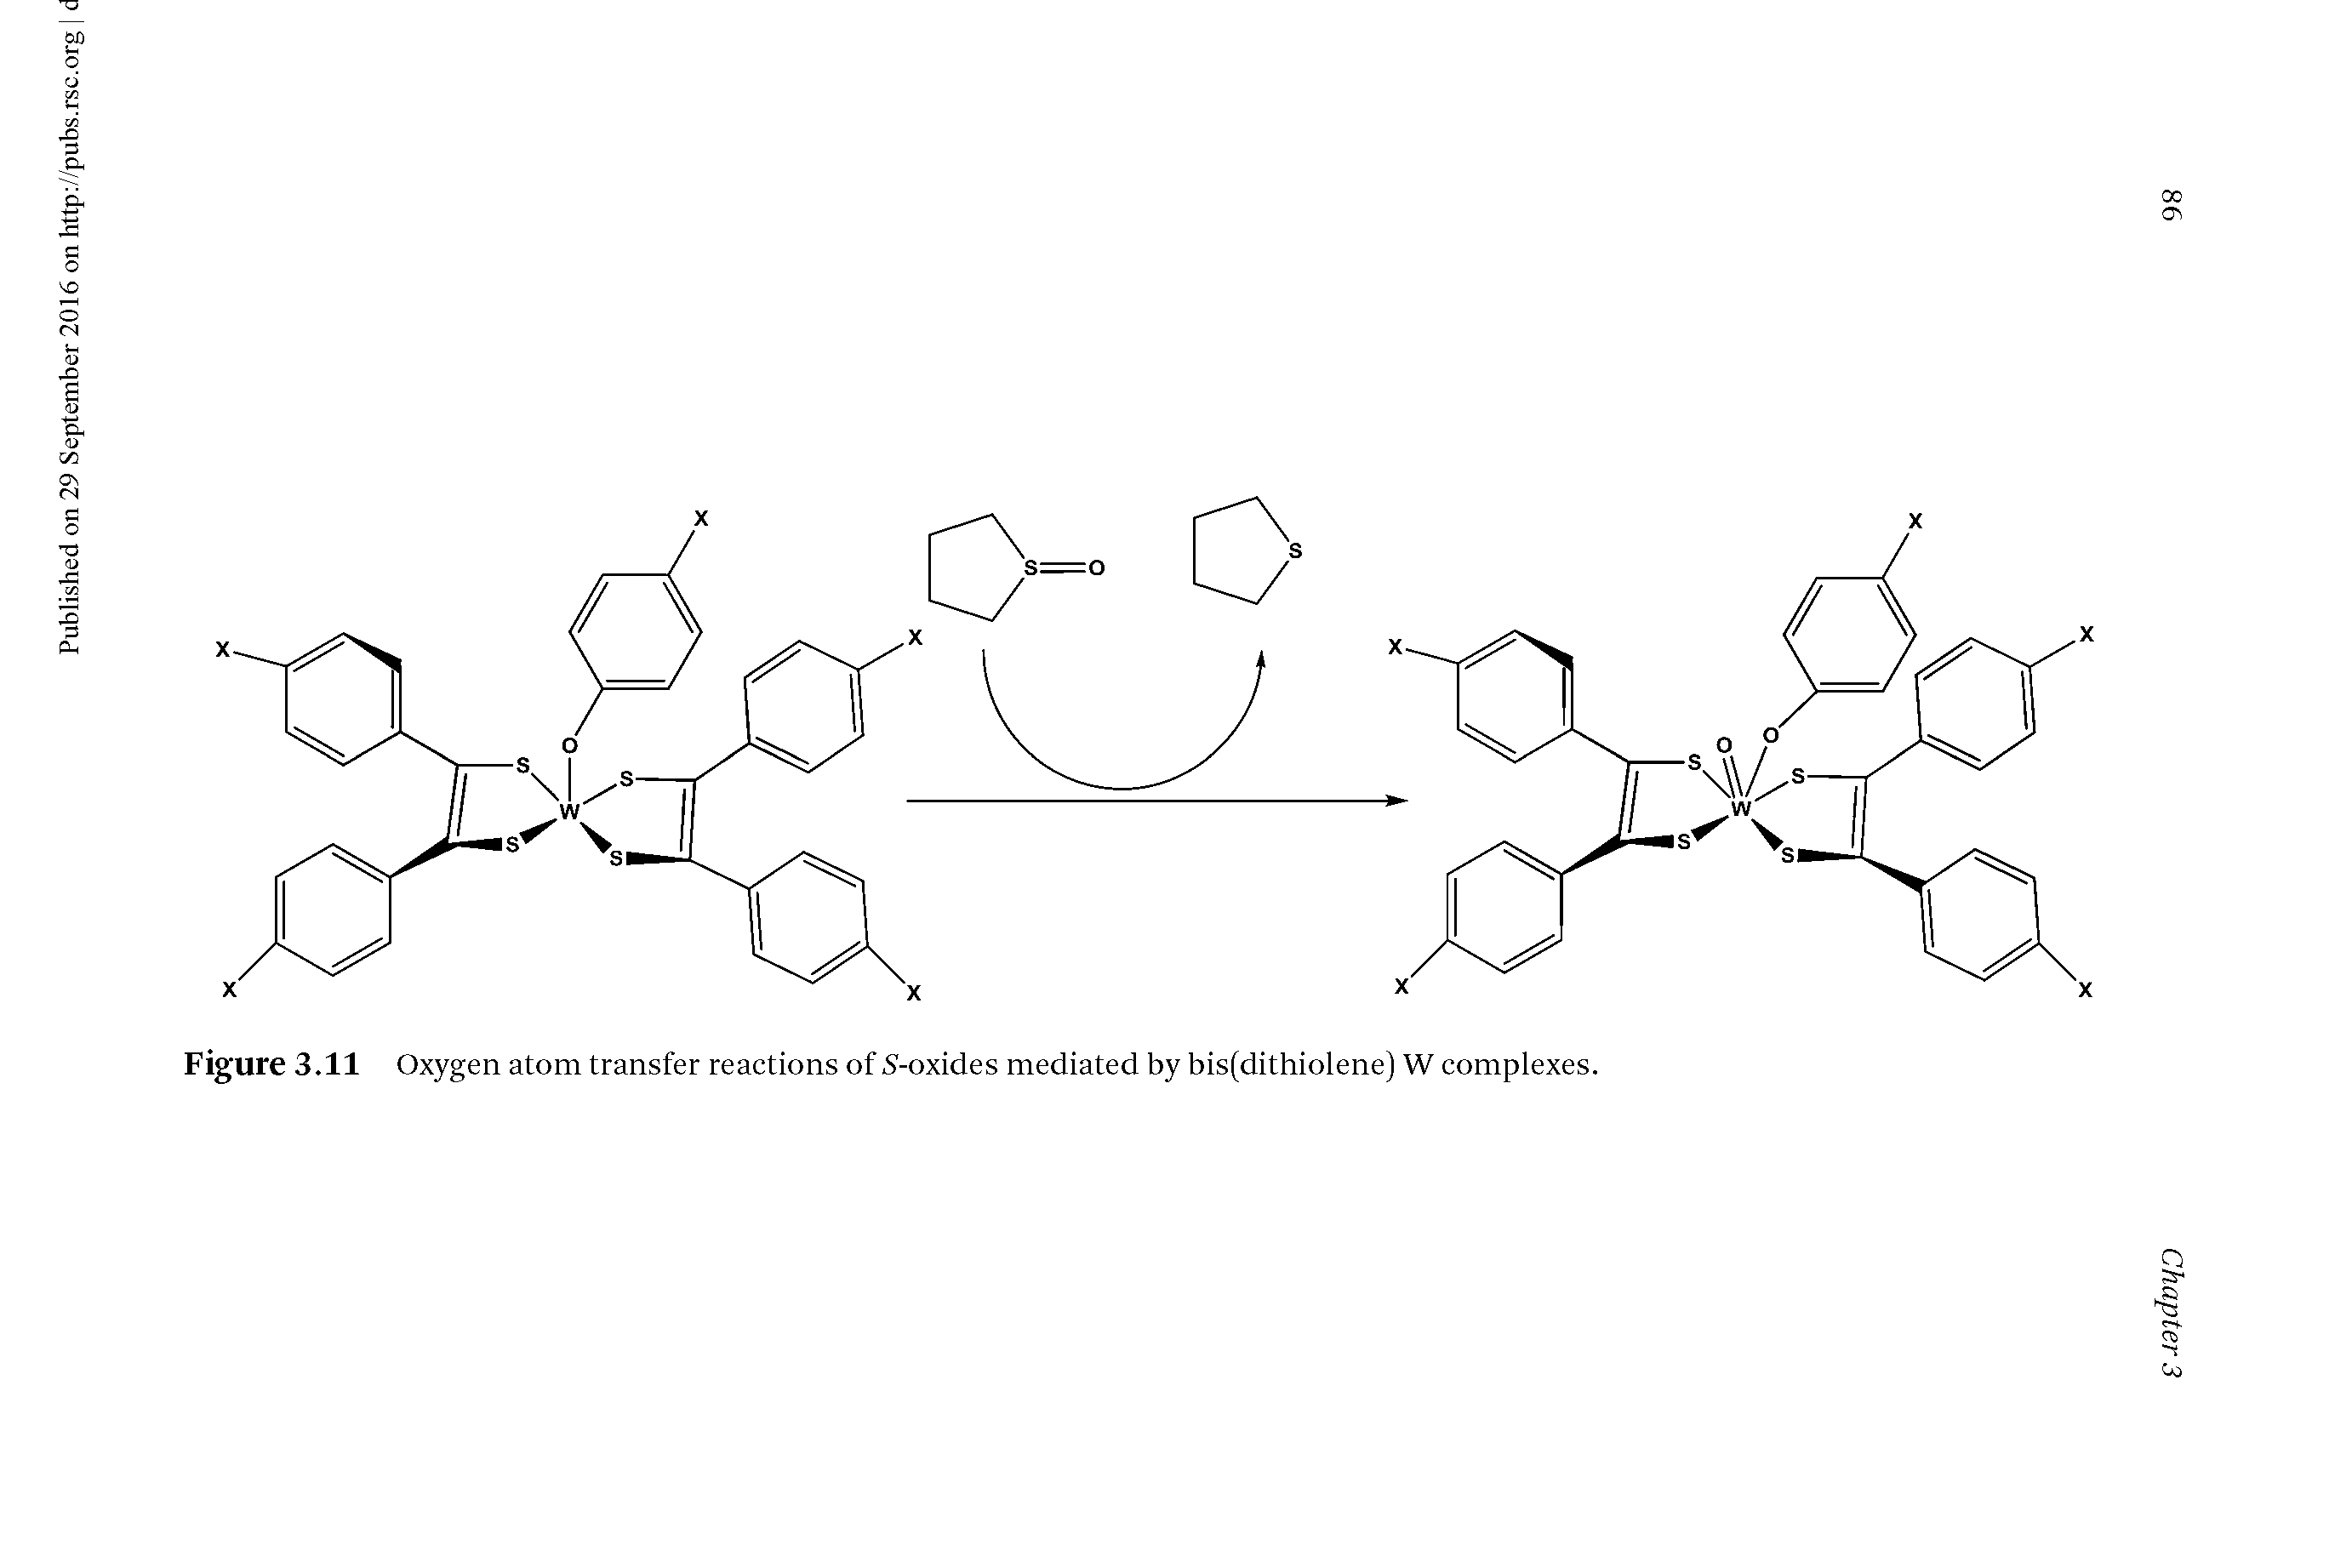 Figure 3.11 Oxygen atom transfer reactions of -oxides mediated by bis(dithiolene) W complexes.